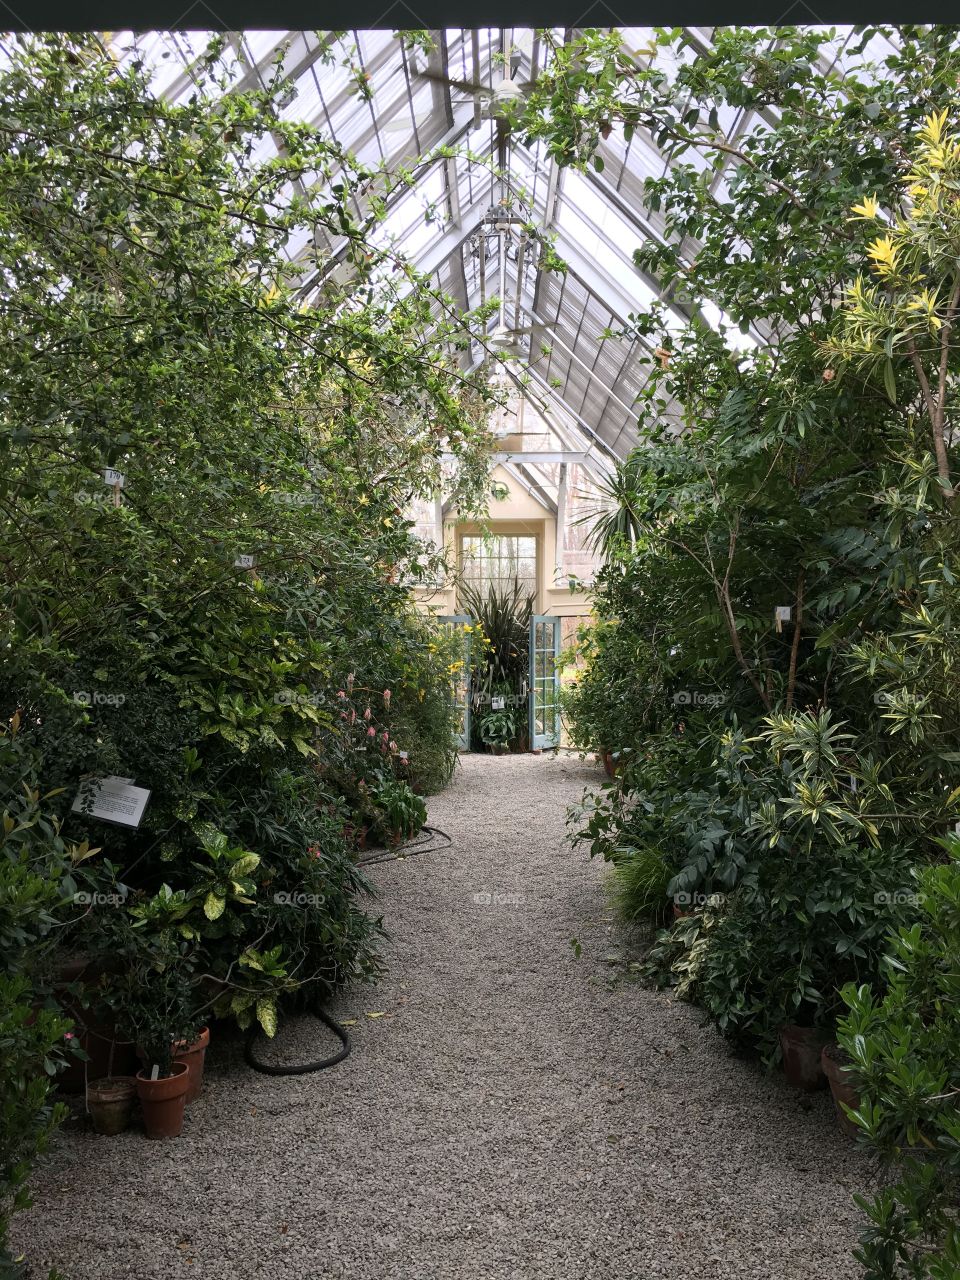 Lush plants line either side of a gravel pathway inside an old greenhouse with glass ceiling